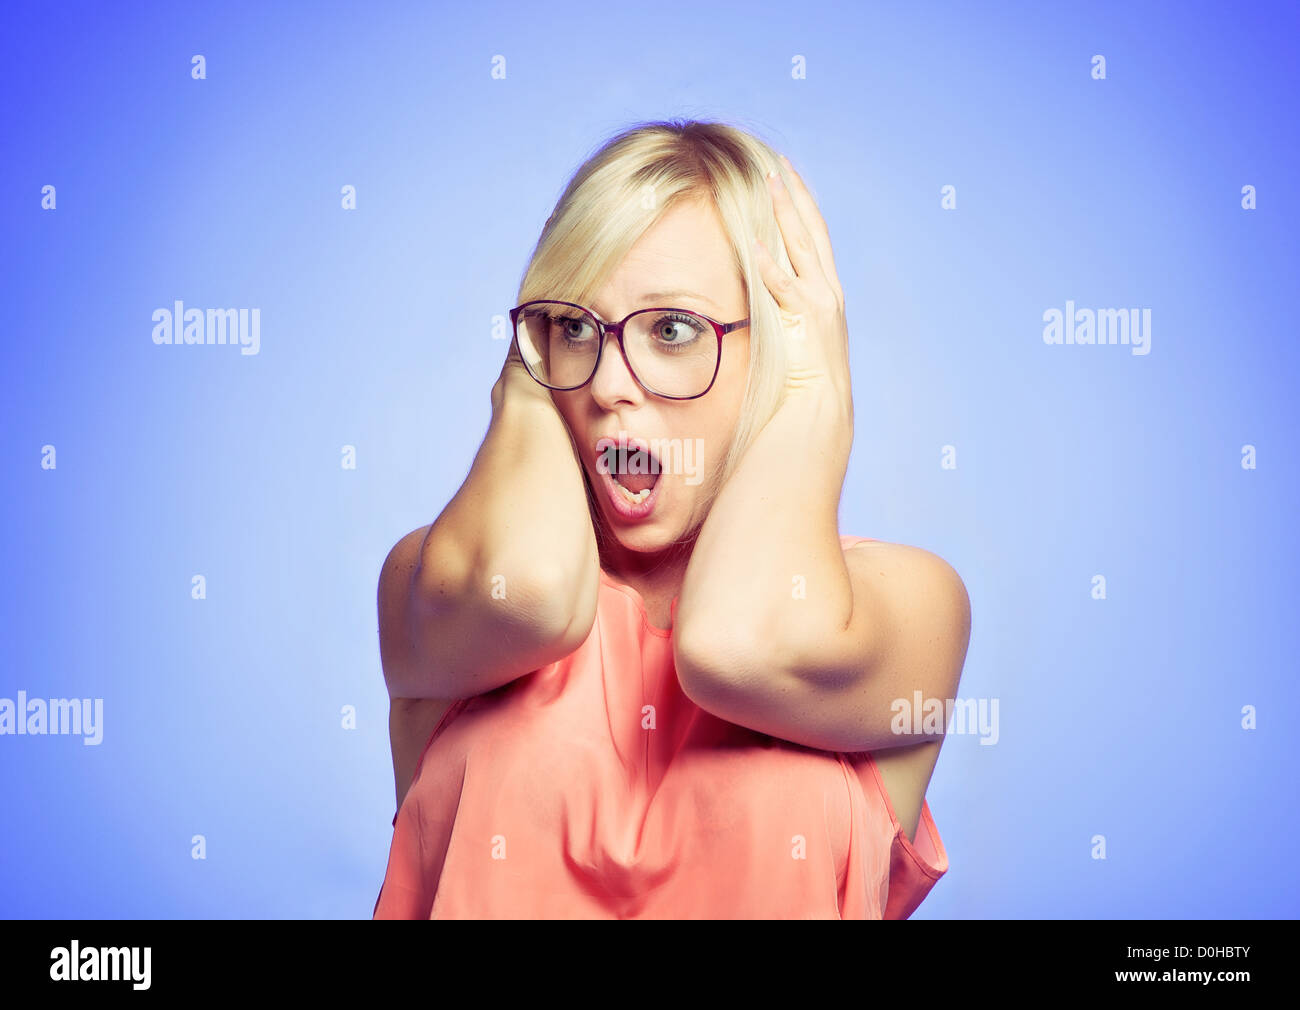 Panicking woman with her mouth open, isolated on blue background Stock Photo